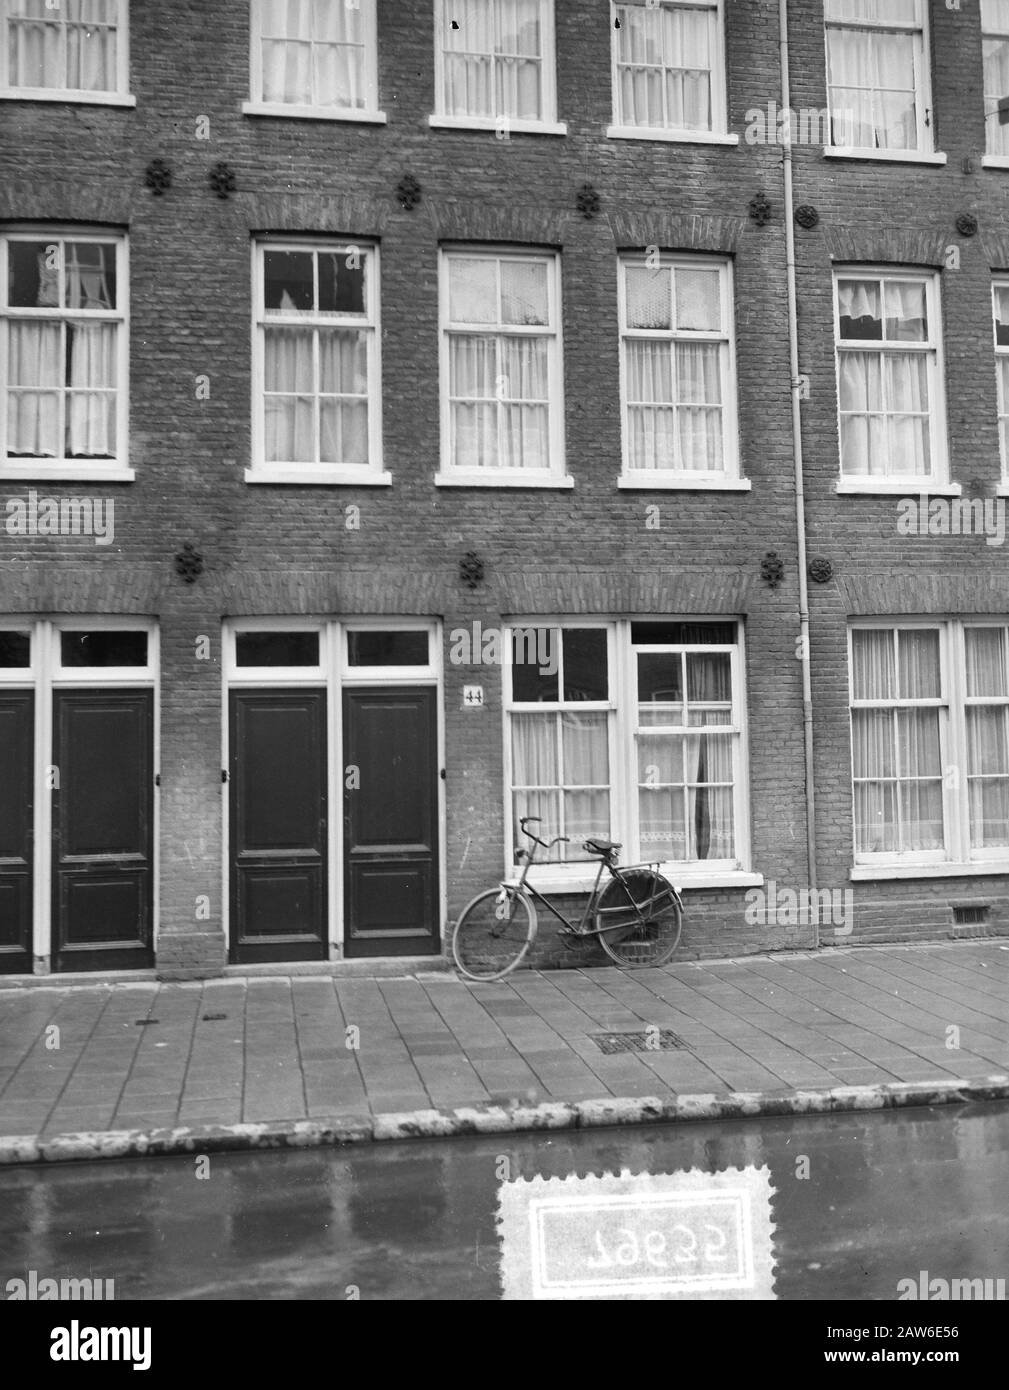 Attempt Csaar Peter Street house number 44 Date: August 26, 1956 Location: Amsterdam Keywords: crime, housing Stock Photo